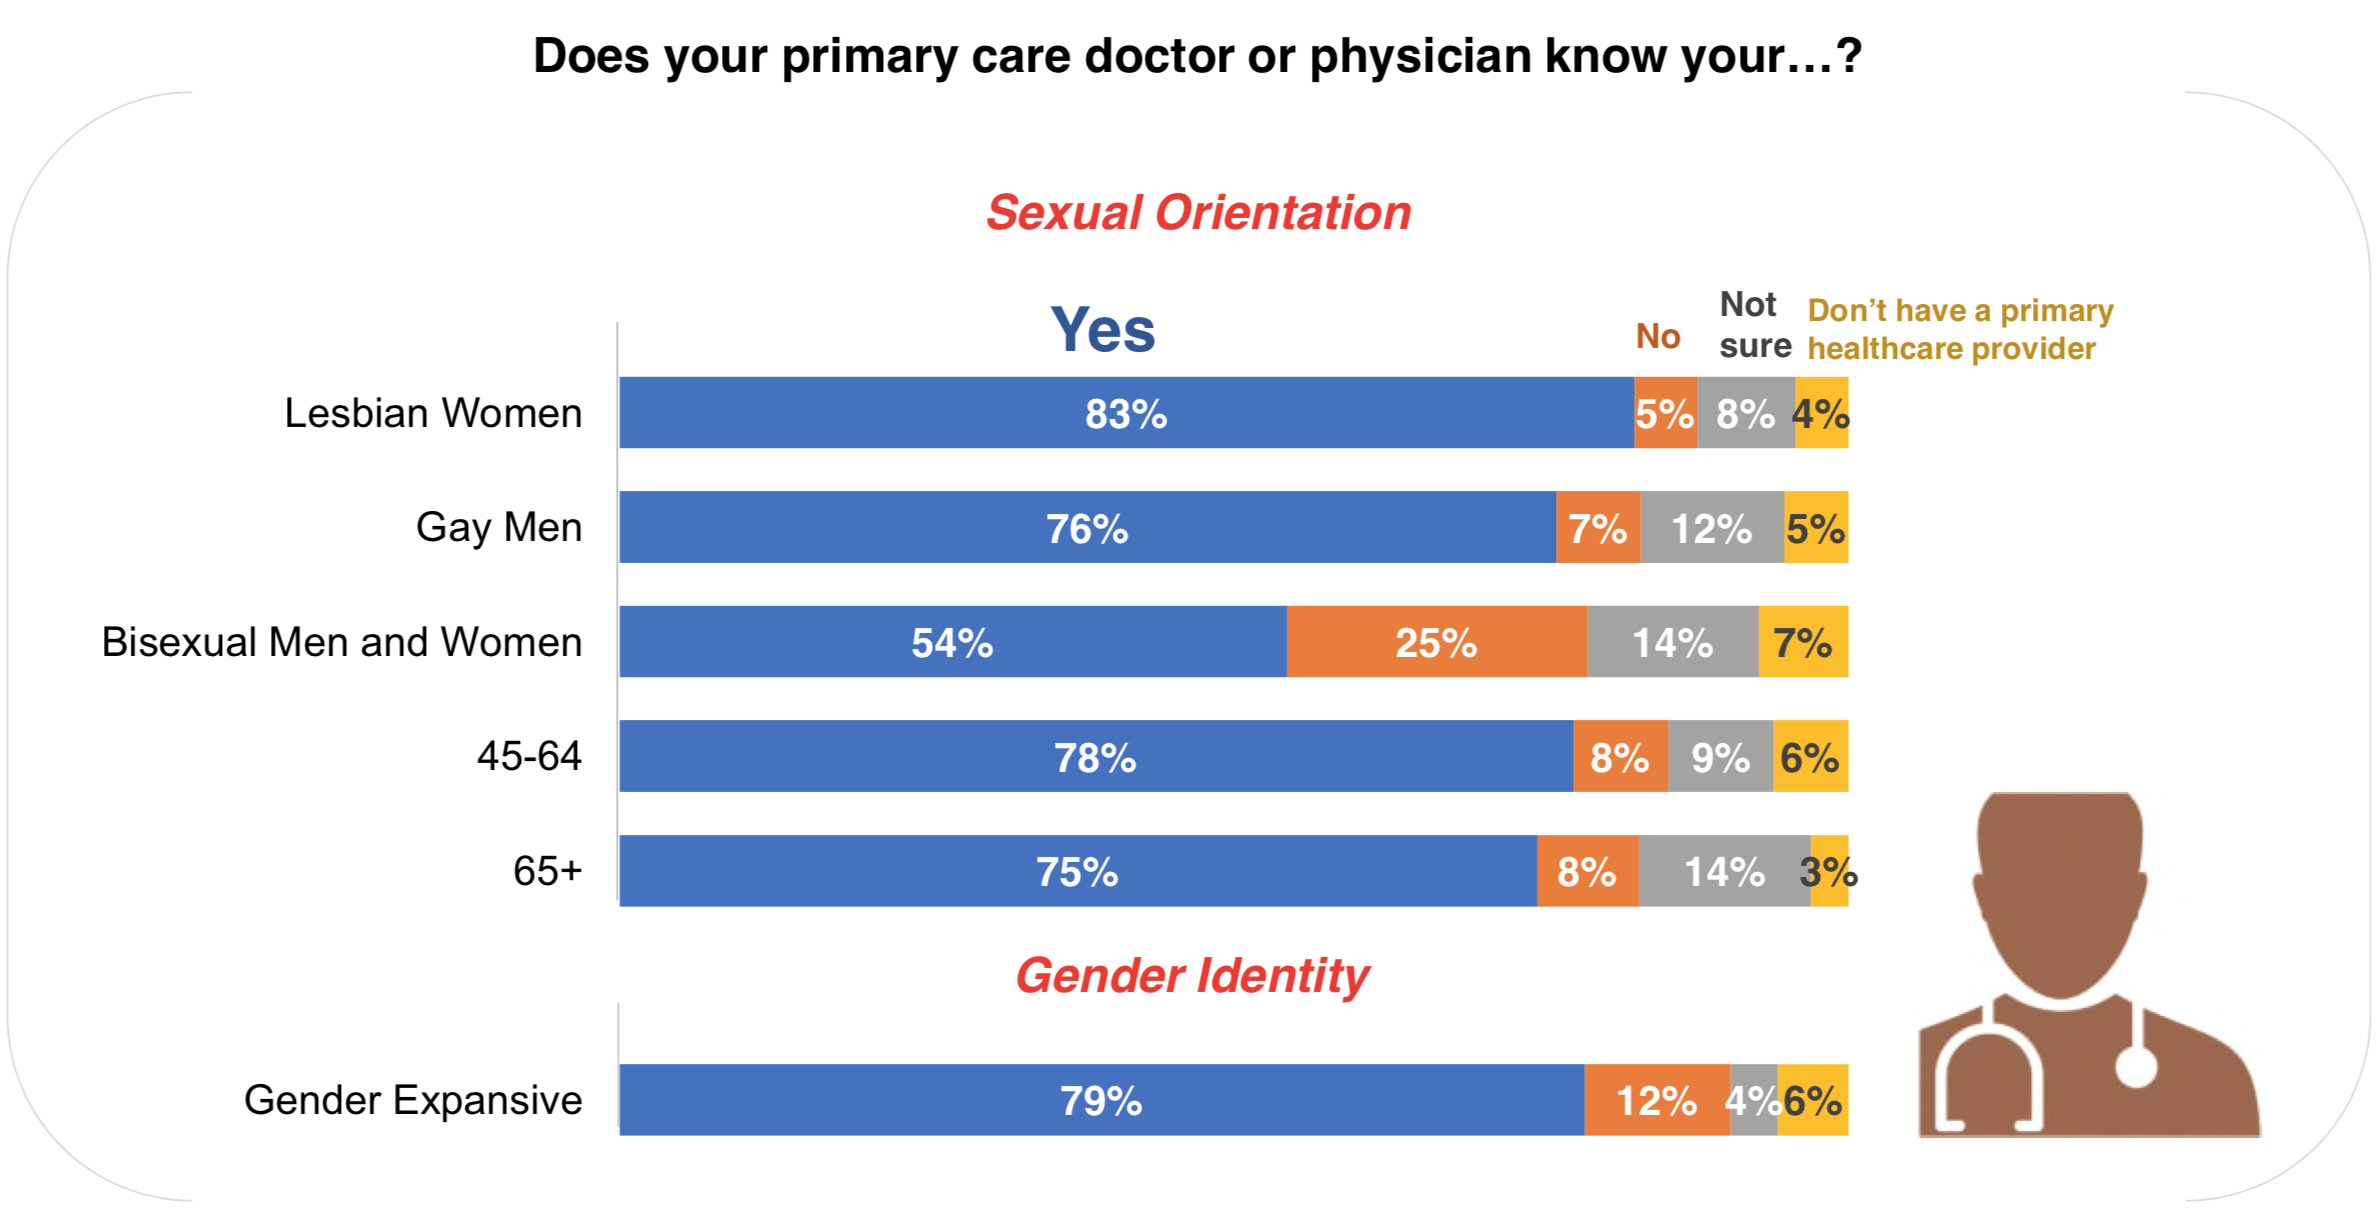 The majority of LGBT respondents in this survey are “out” to their physician, but bisexual men and women are significantly less likely to say their primary care physician knows their sexual orientation.